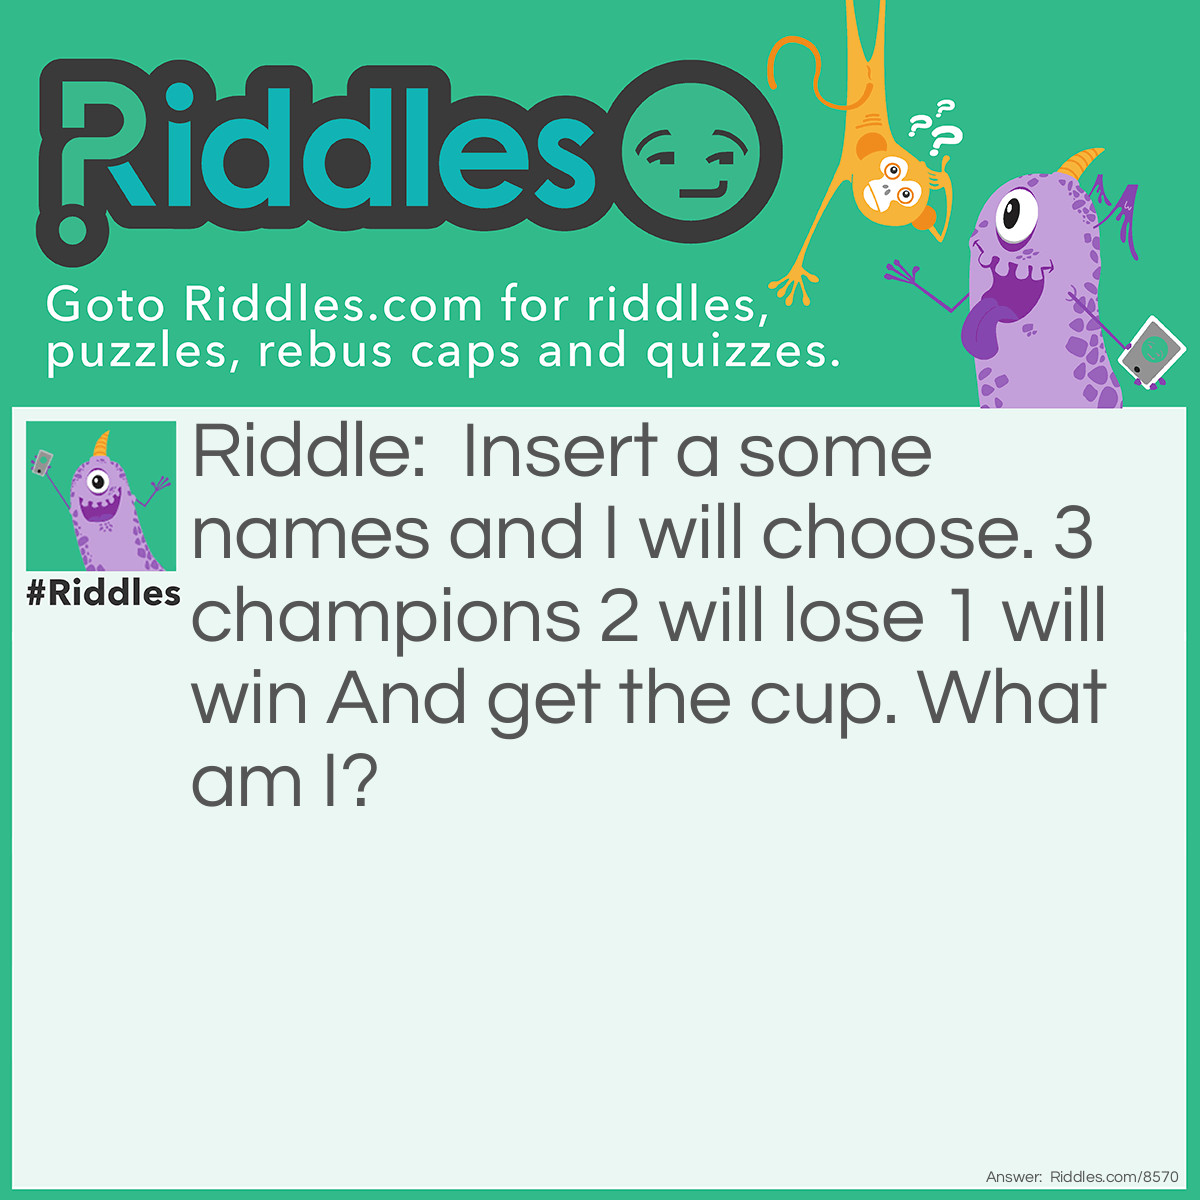 Riddle: Insert a some names and I will choose. 3 champions 2 will lose 1 will win And get the cup. What am I? Answer: The Goblet of Fire The chooser of the Triwizard Tournament.